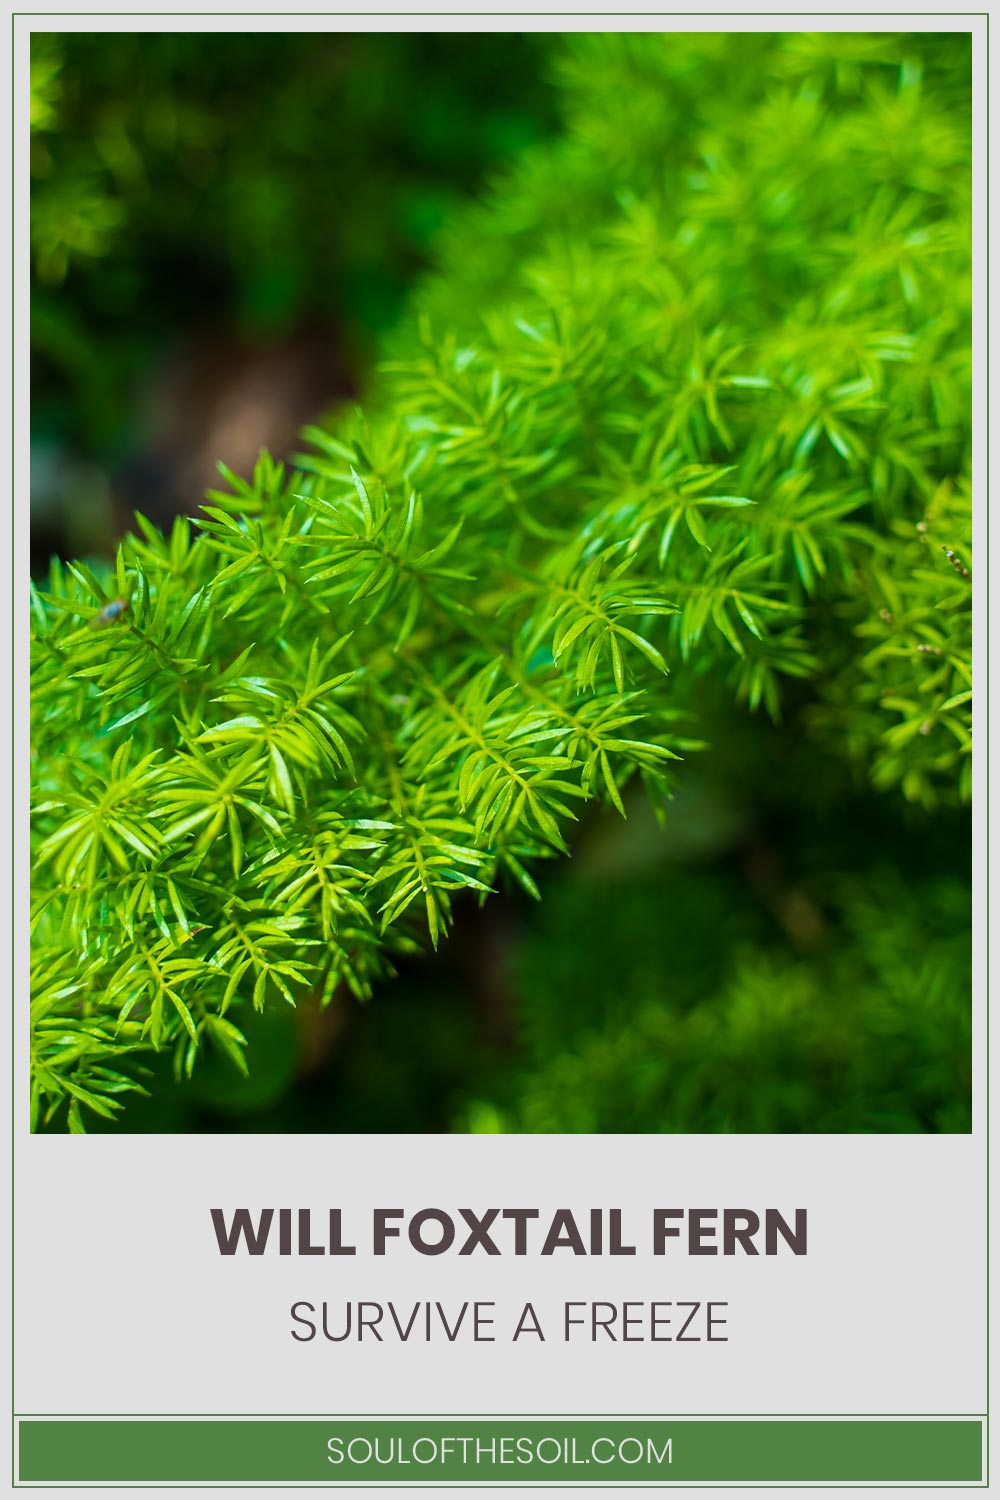 Foxtail Fern - Will they survive a freeze?